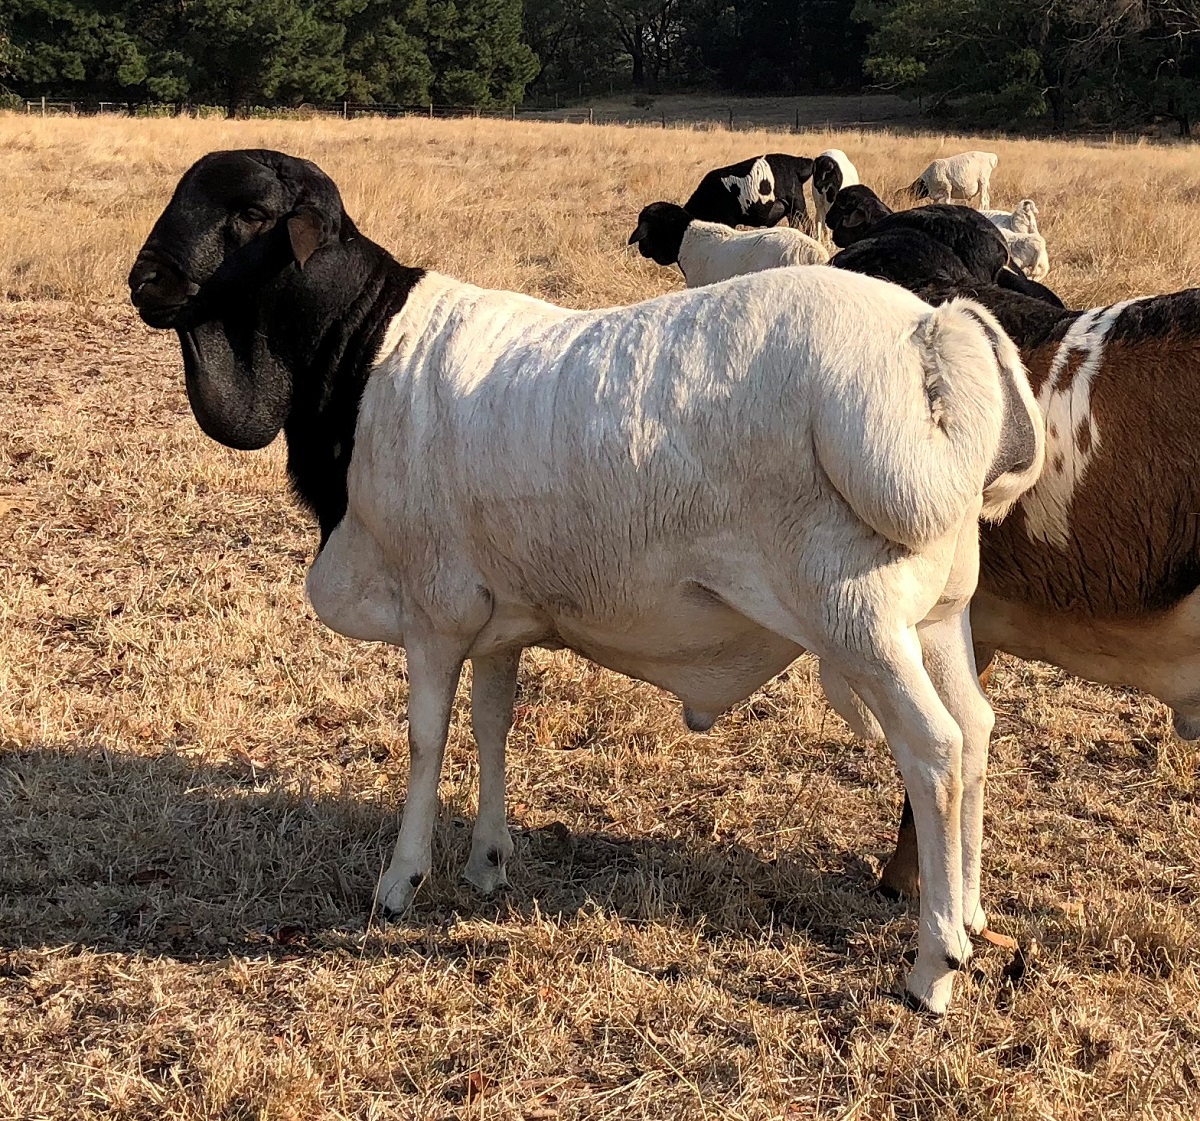 Coolibah “The African”  .  “The African” was ovulated in the Karoo in South Africa and imported into Australia as an embryo. Born in Australia in 2017 he was used at stud in 2018 over 80 Persian ewes.